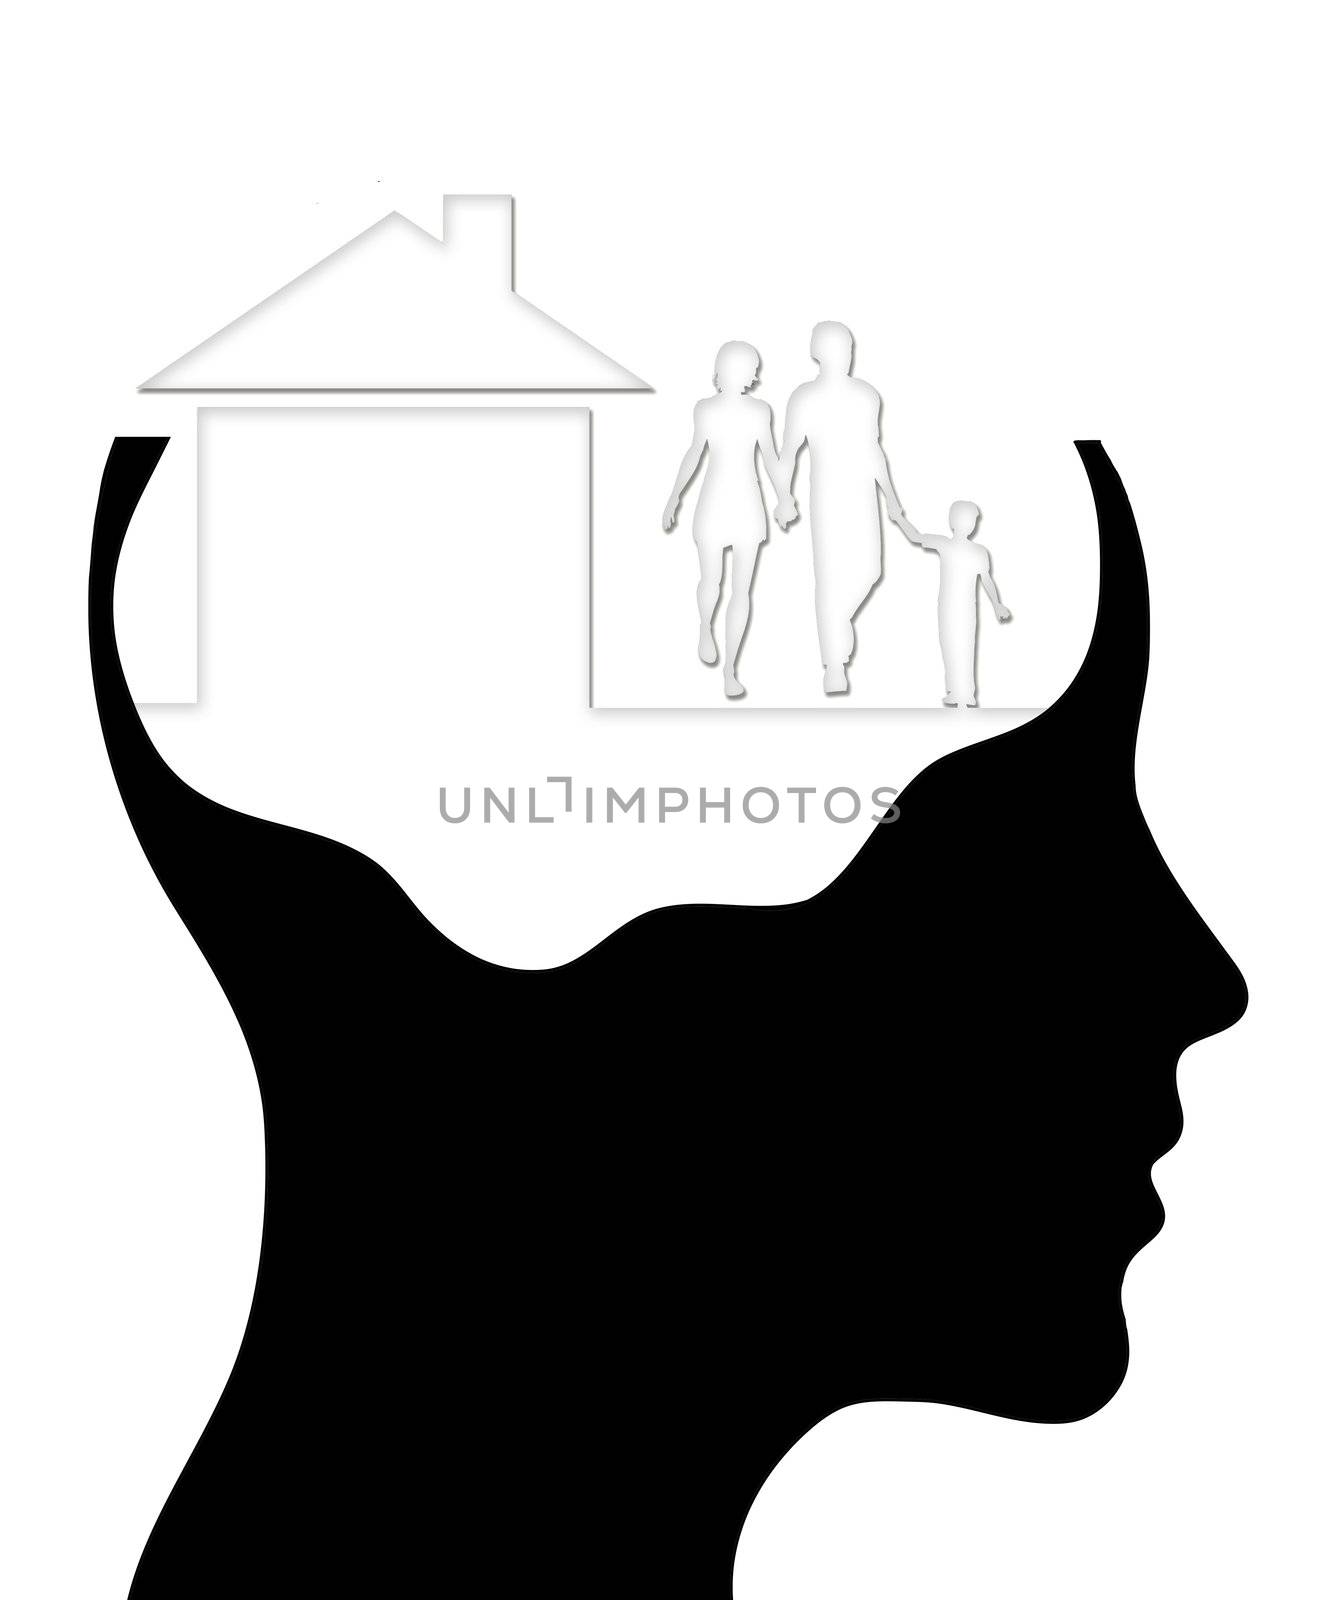 A concept for Dream Home, where Thinking head silhouette is shown